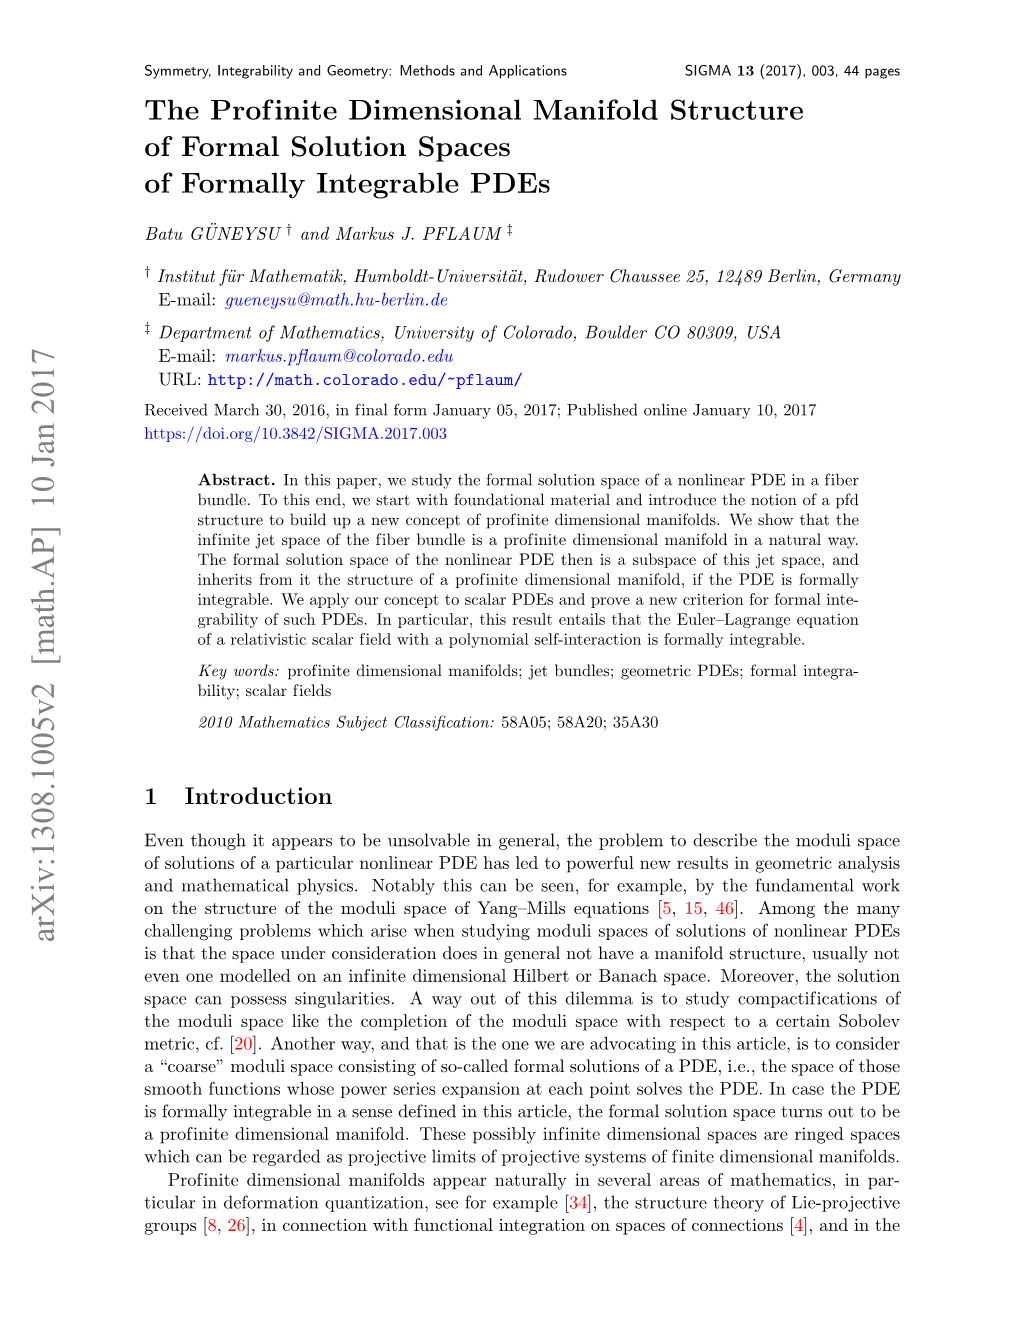 The Profinite Dimensional Manifold Structure of Formal Solution Spaces of Formally Integrable Pdes